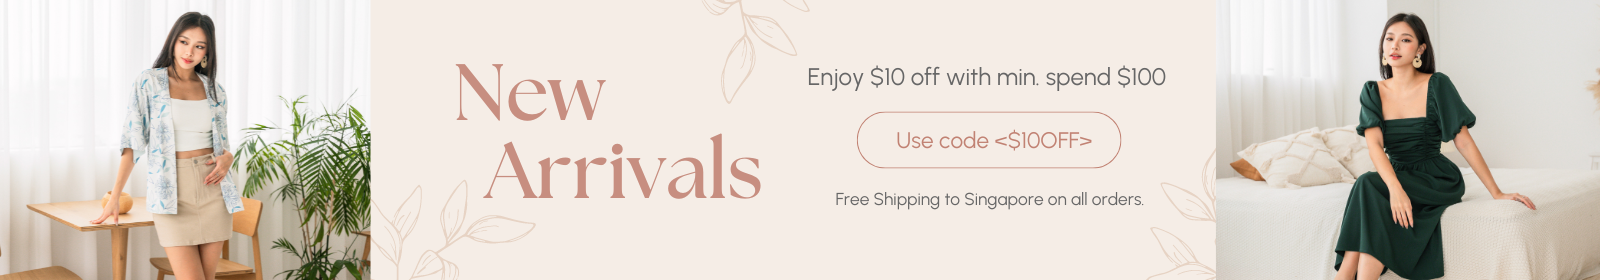 New Arrivals Banner ($10 off $100) #2